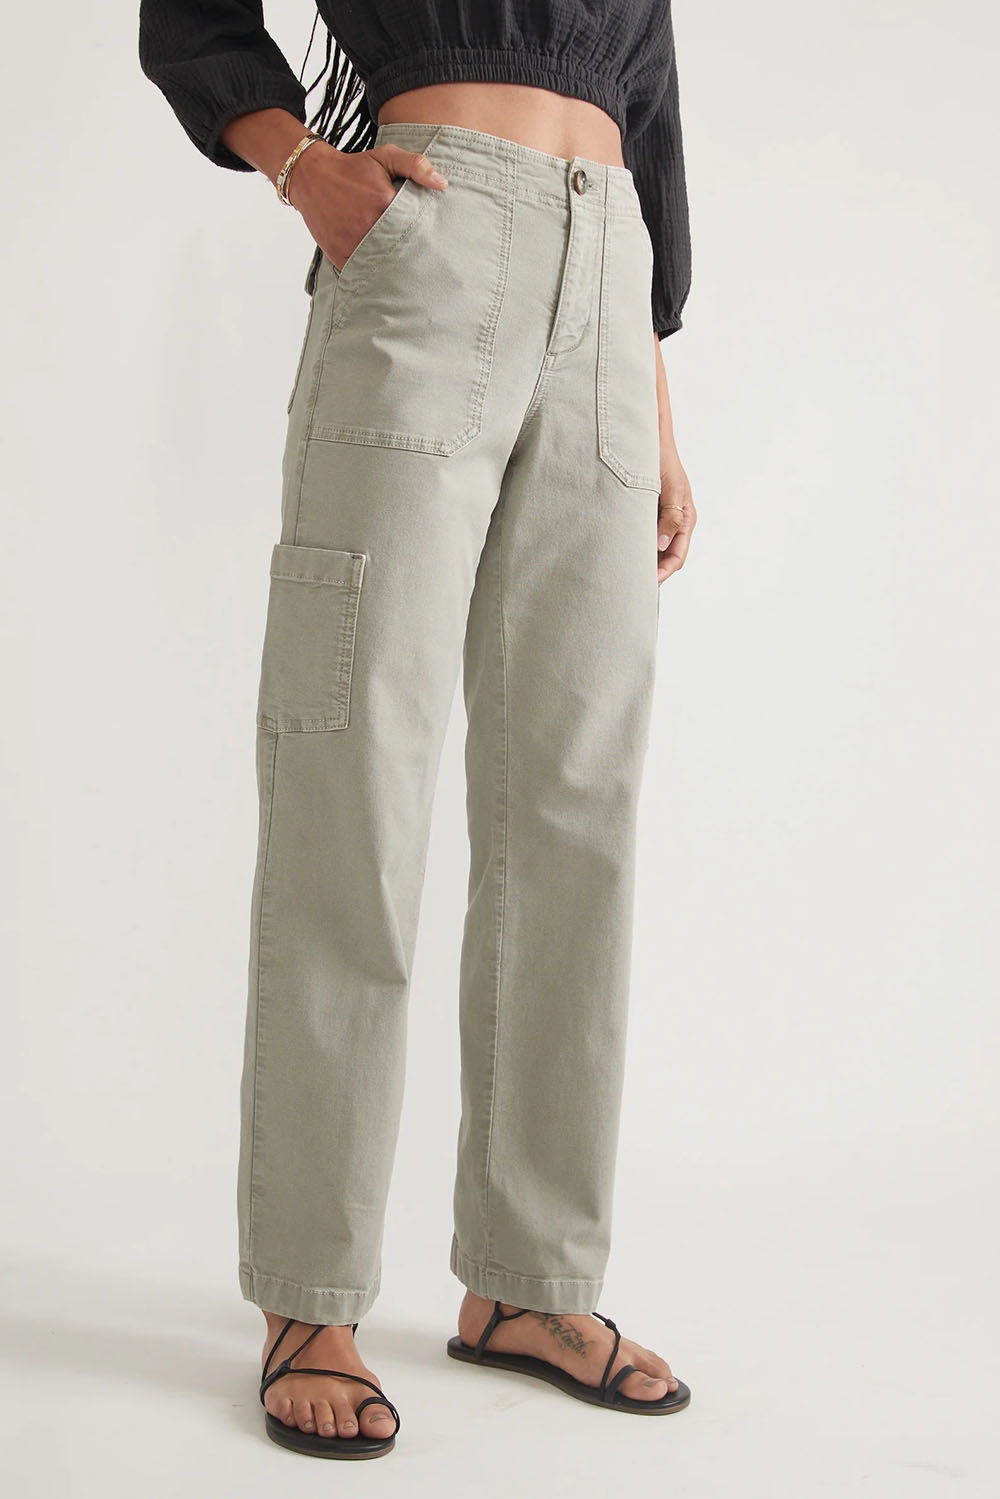 Marine Layer - Aria Straight Leg Utility Pant - Faded Olive - Side